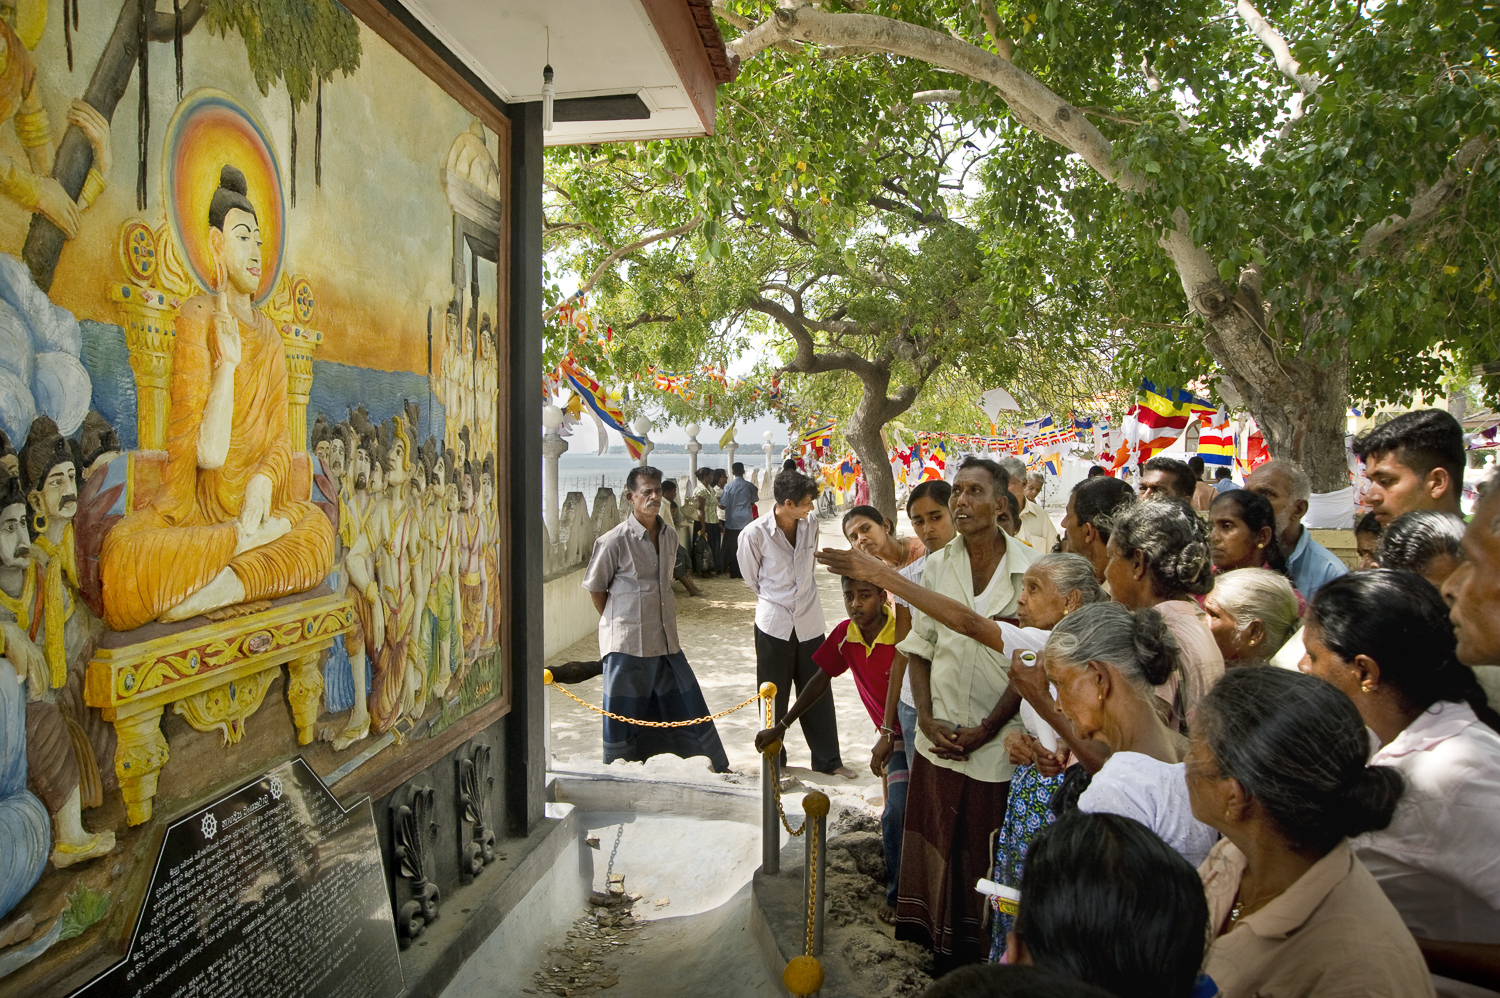  Pilgrims visiting Nagadeepa, an island north of Jaffna in the Palk strait, said to be Buddha's first landing point on the way to Sri Lanka. As the island was off-limits for much of the civil war, many of the older pilgrims are visiting for the first